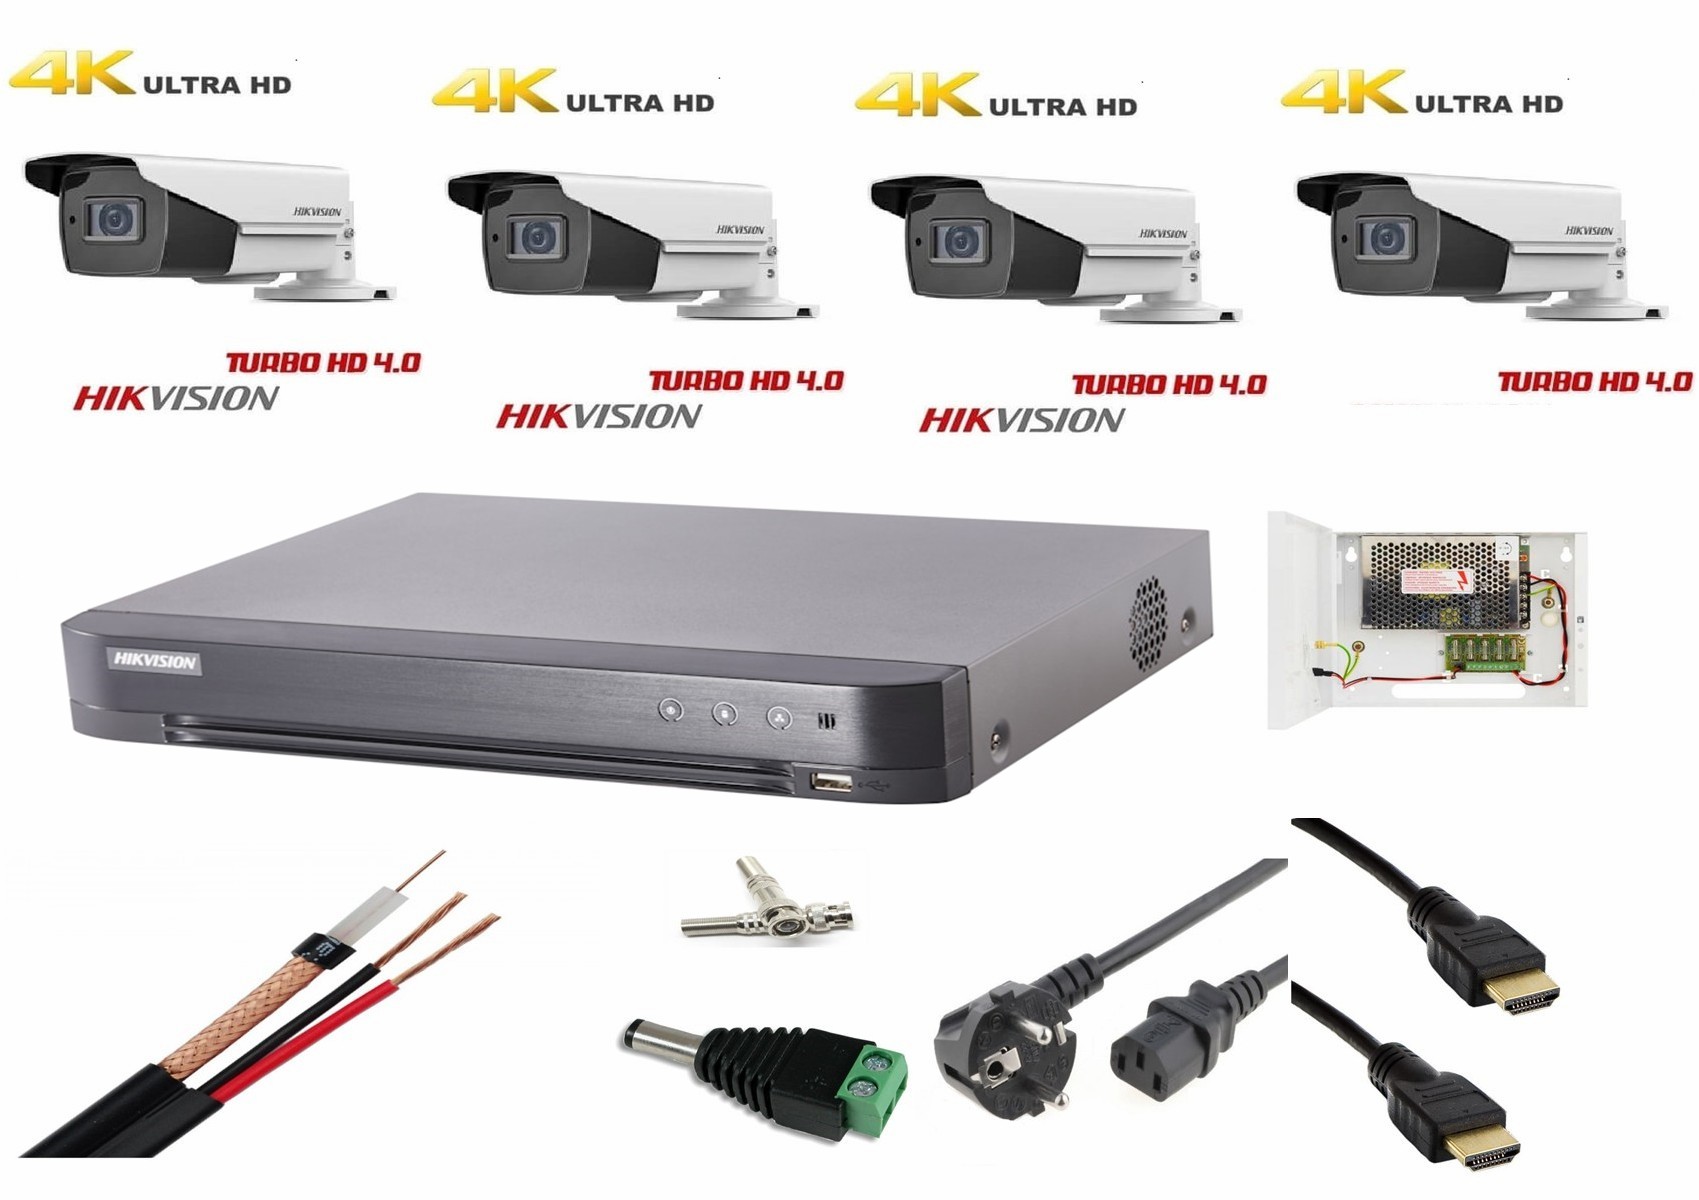 Sistem video ultra profesional Hikvision 4 camere Ultra HD 8MP DVR 4 canale, full live internet - Rovision